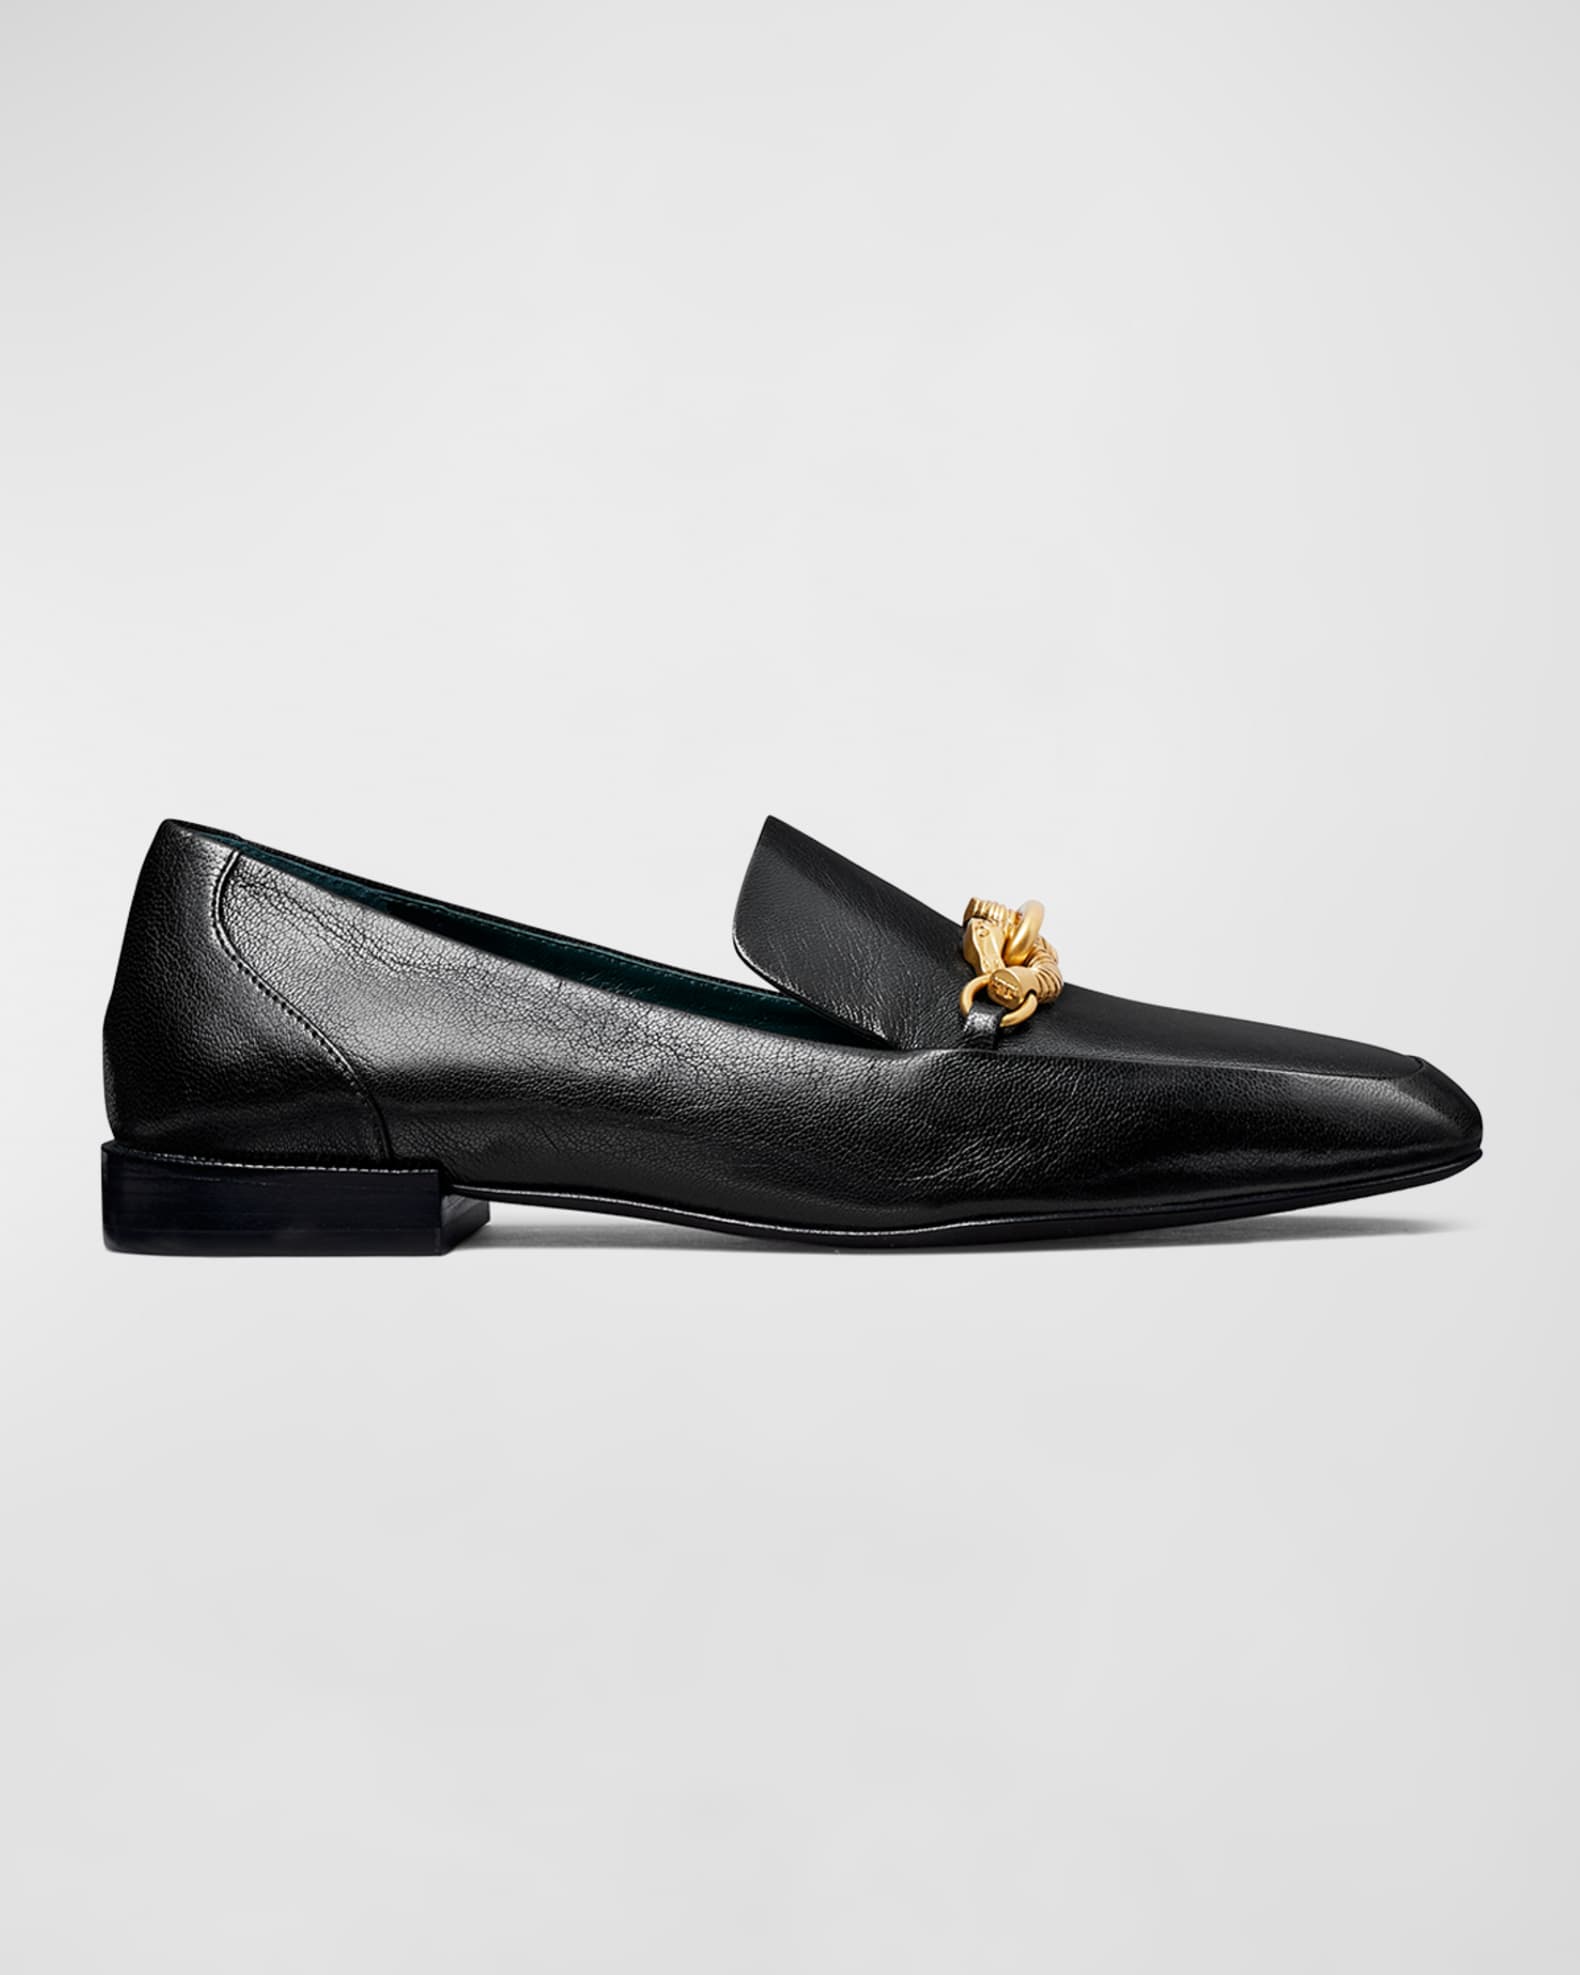 Tory Burch Jessa Leather Chain Loafers | Neiman Marcus